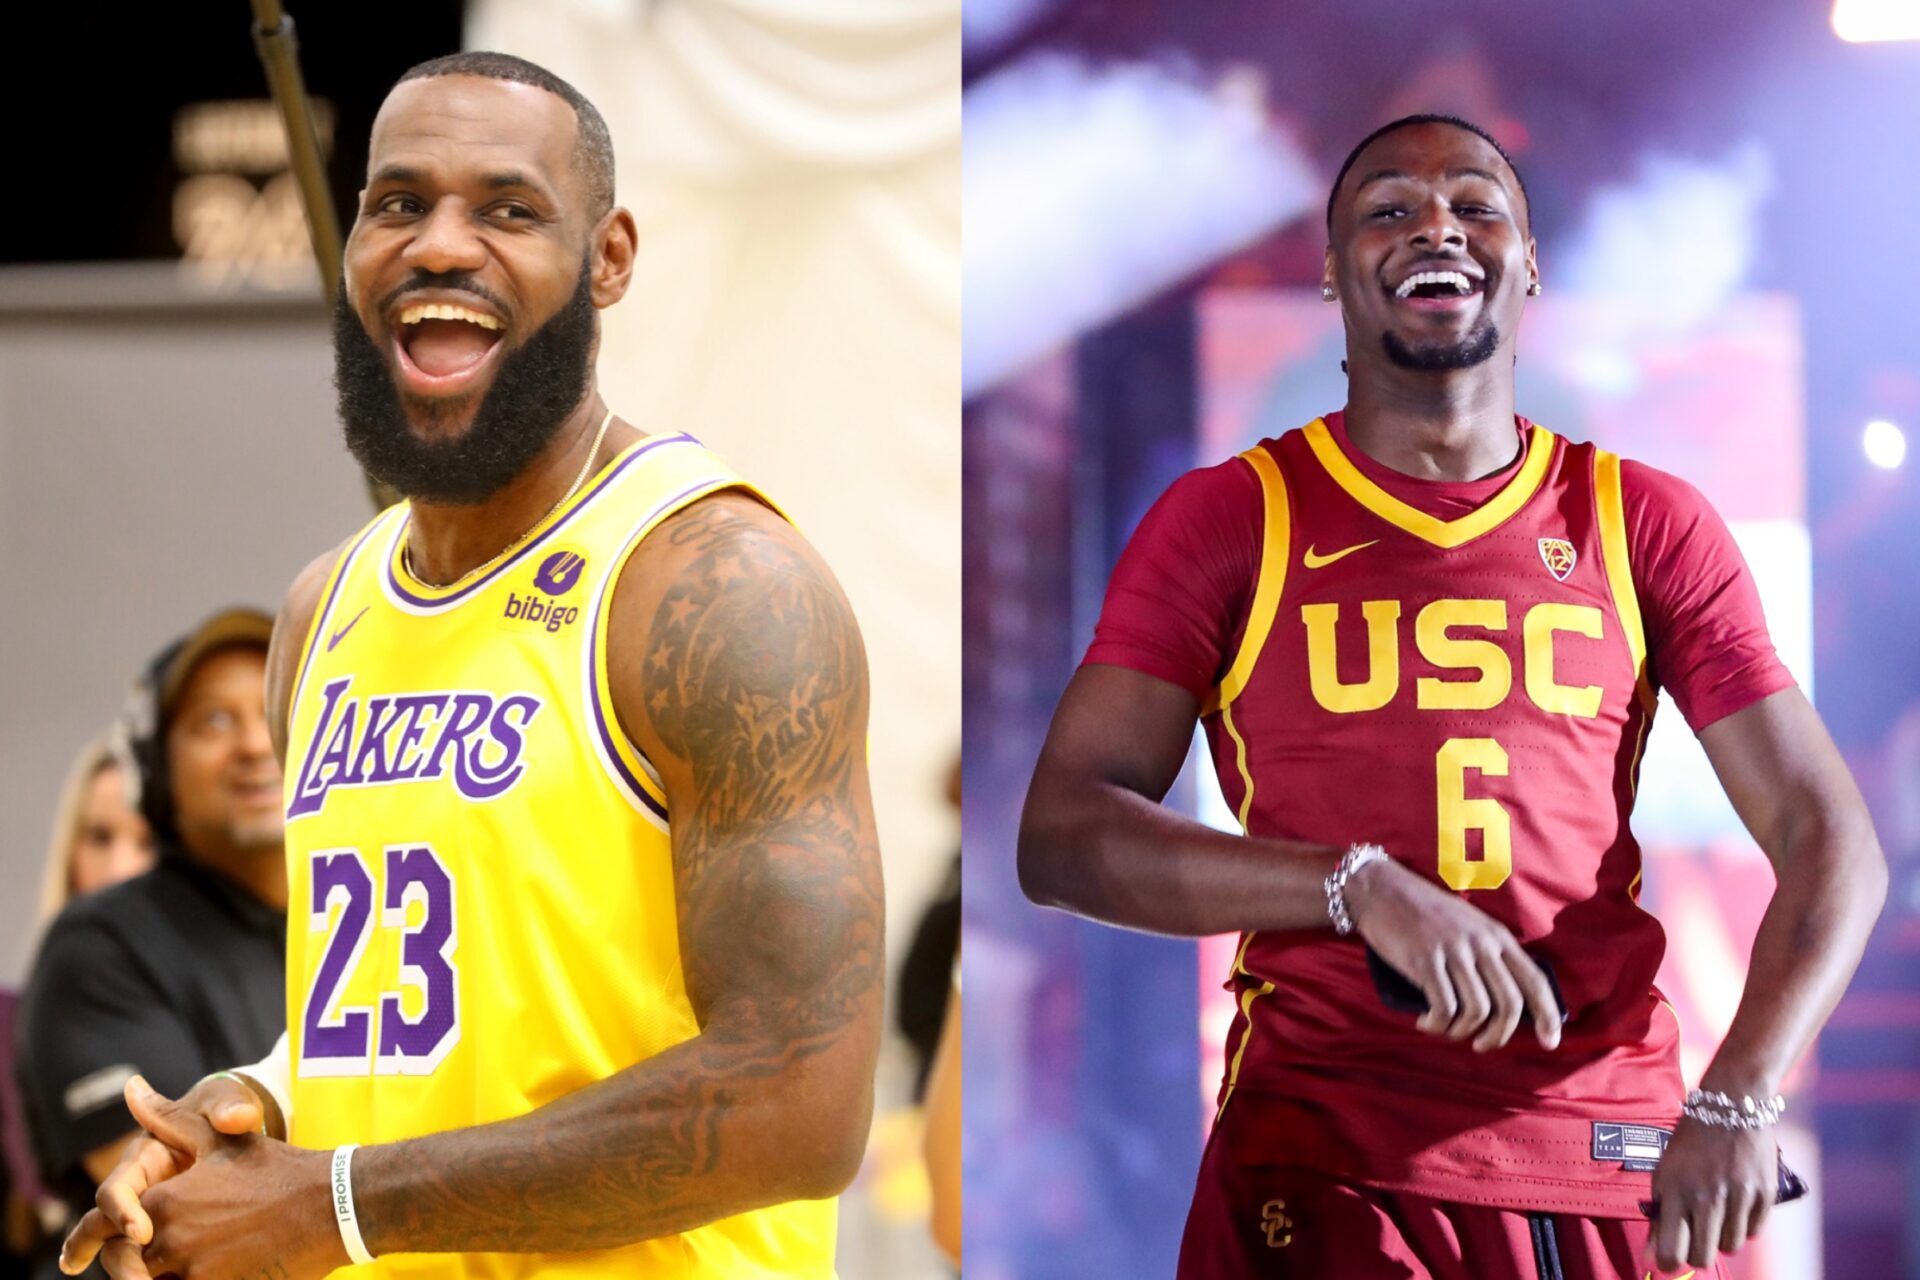 ‘Family Over Everything’: LeBron James Vows To Miss Lakers Game If It Conflicts With Bronny’s Highly Anticipated USC Debut